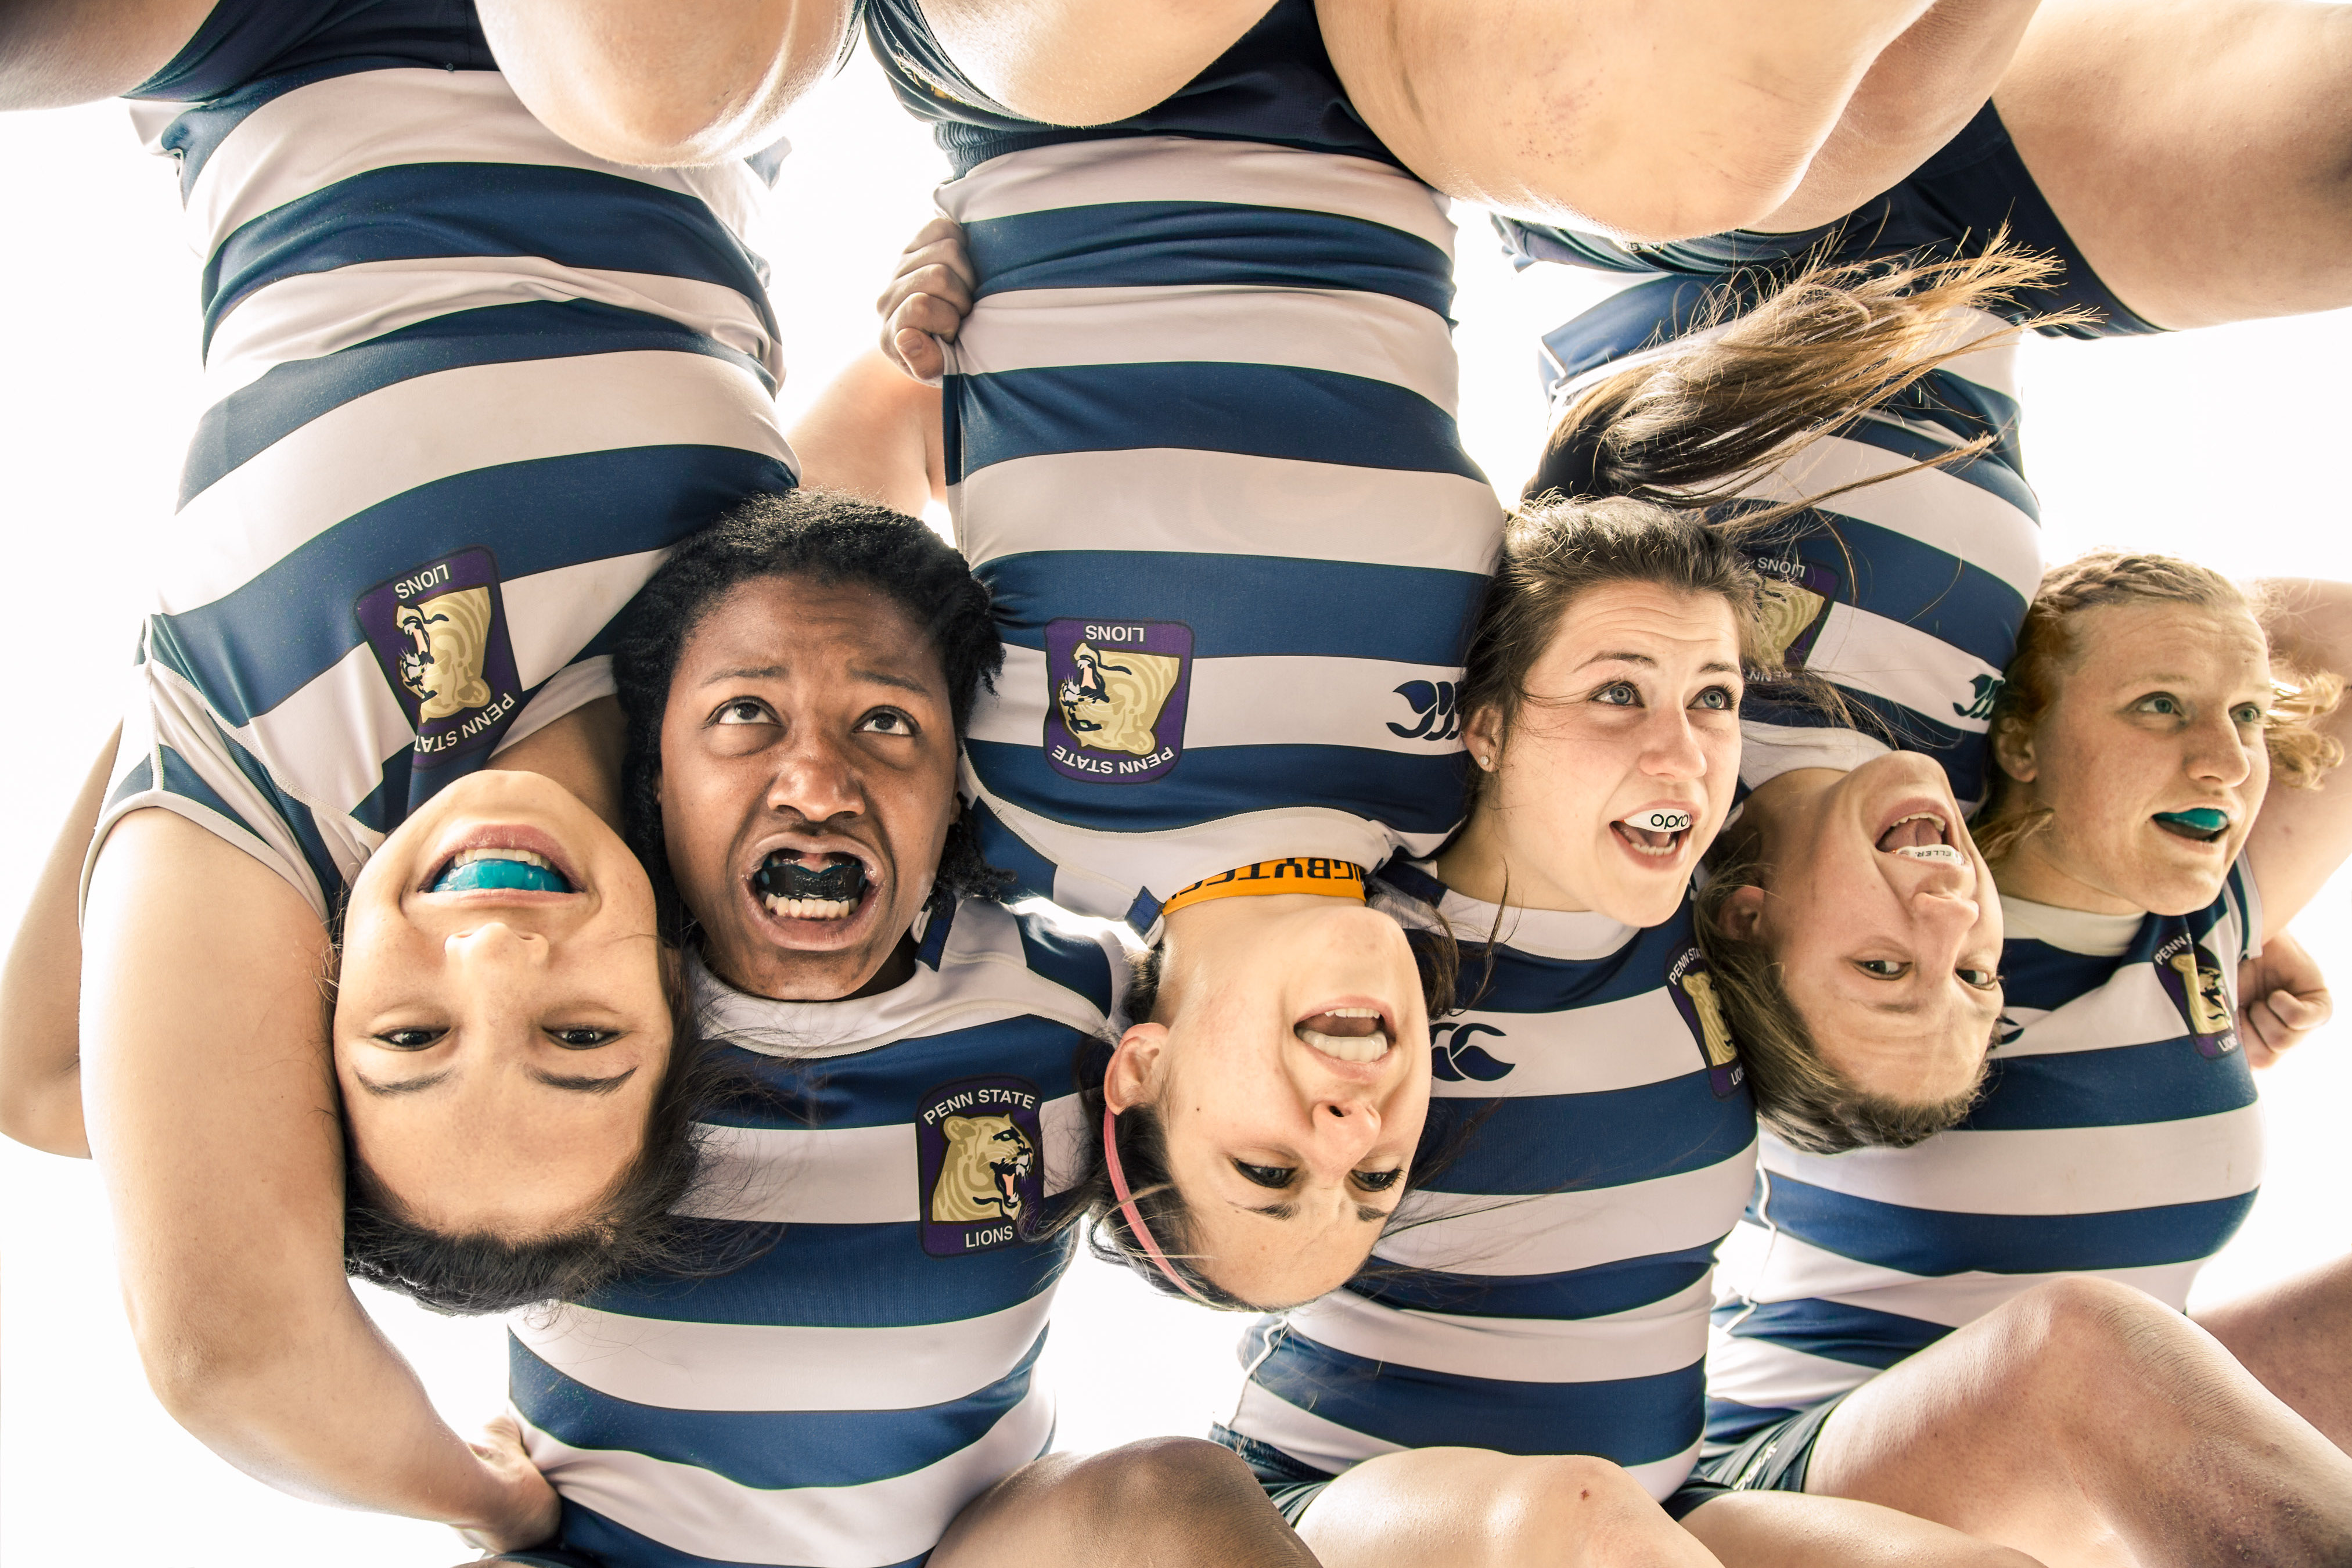 PSU women's rugby players in huddle